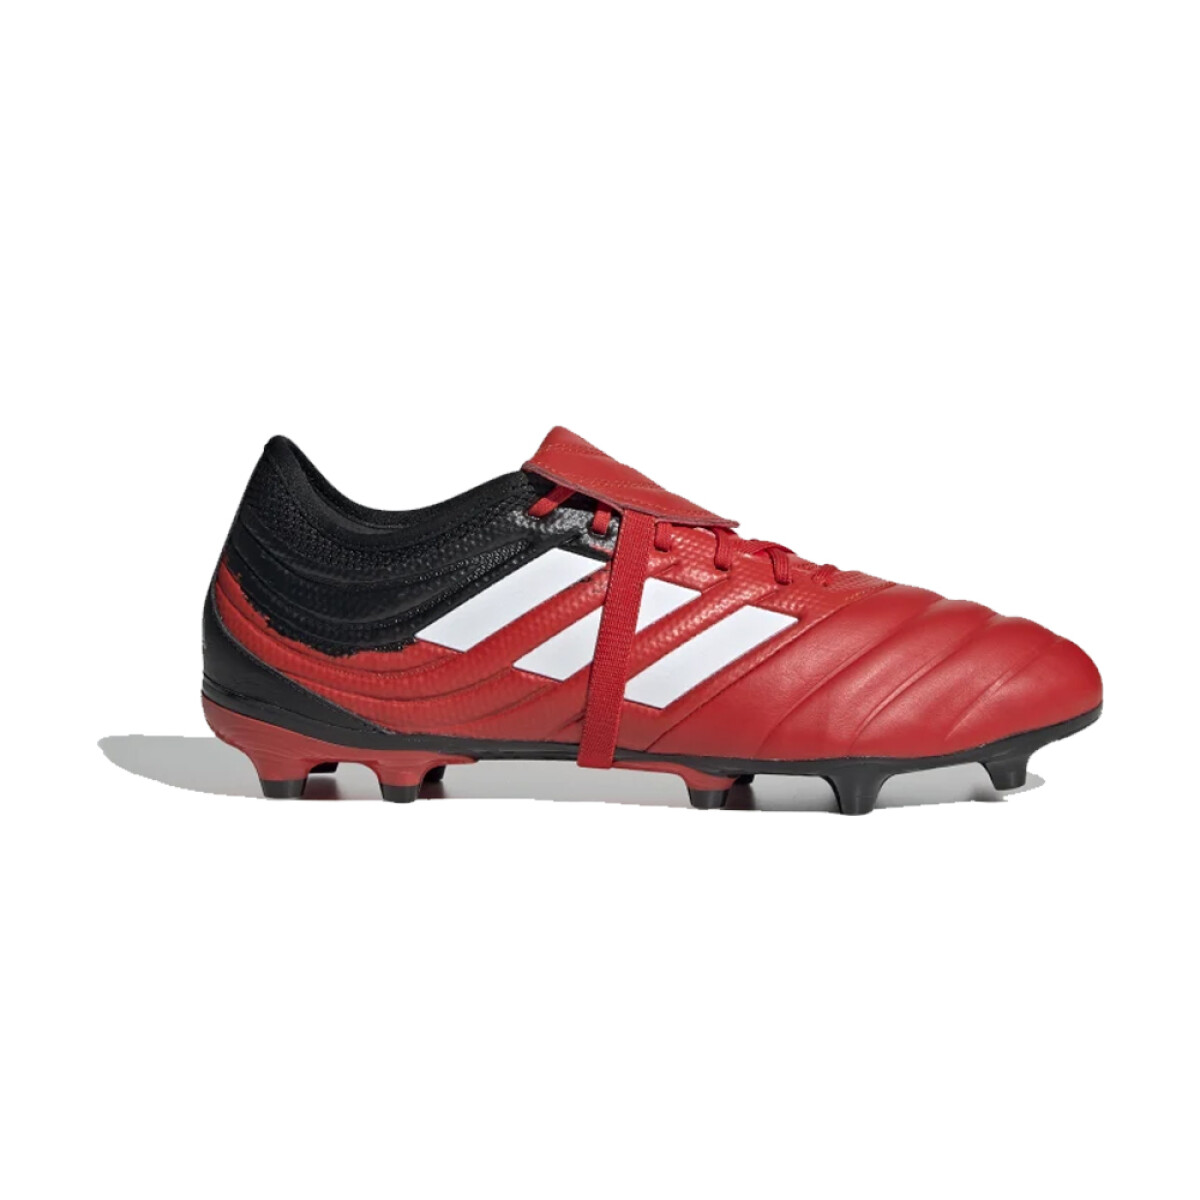 adidas Copa Gloro 20.2 Firm Ground Cleats - Red/Black/White 